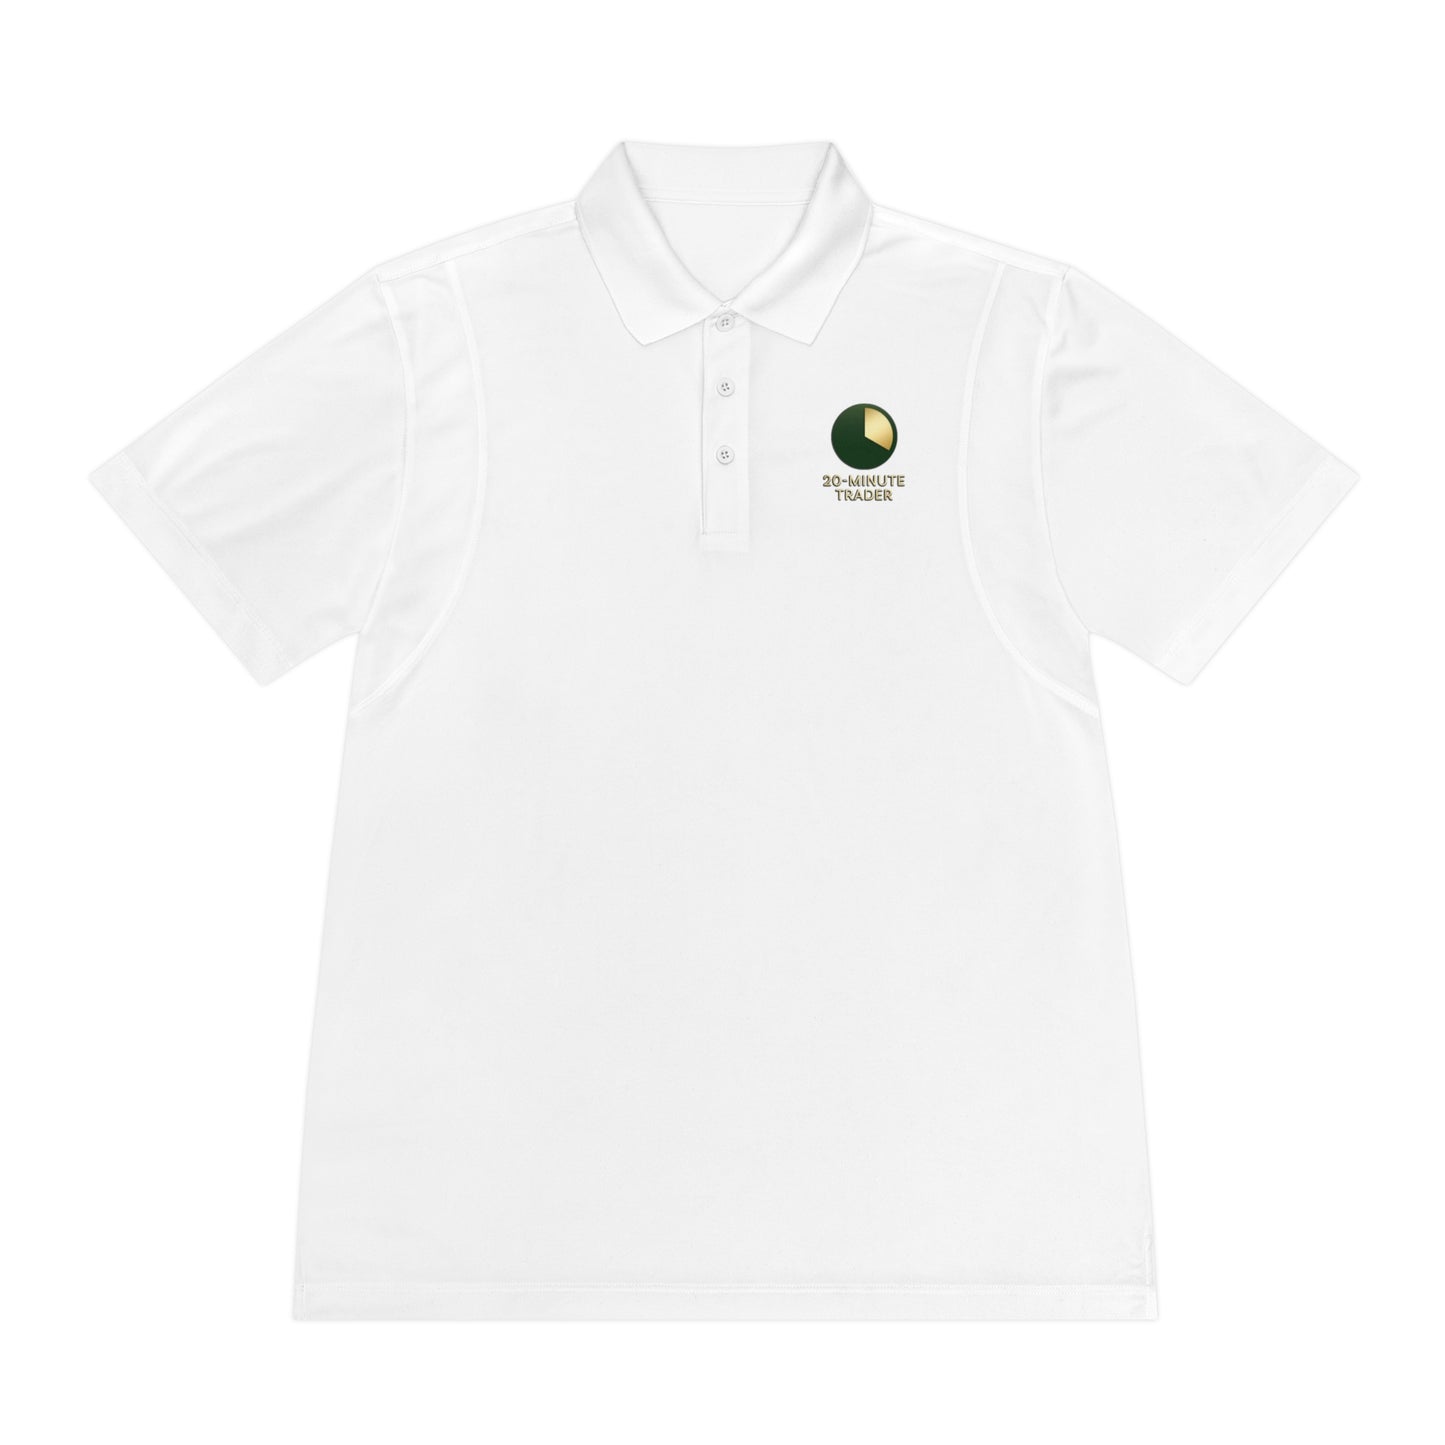 Team Exclusive: 20-Minute Trader Performance Polo